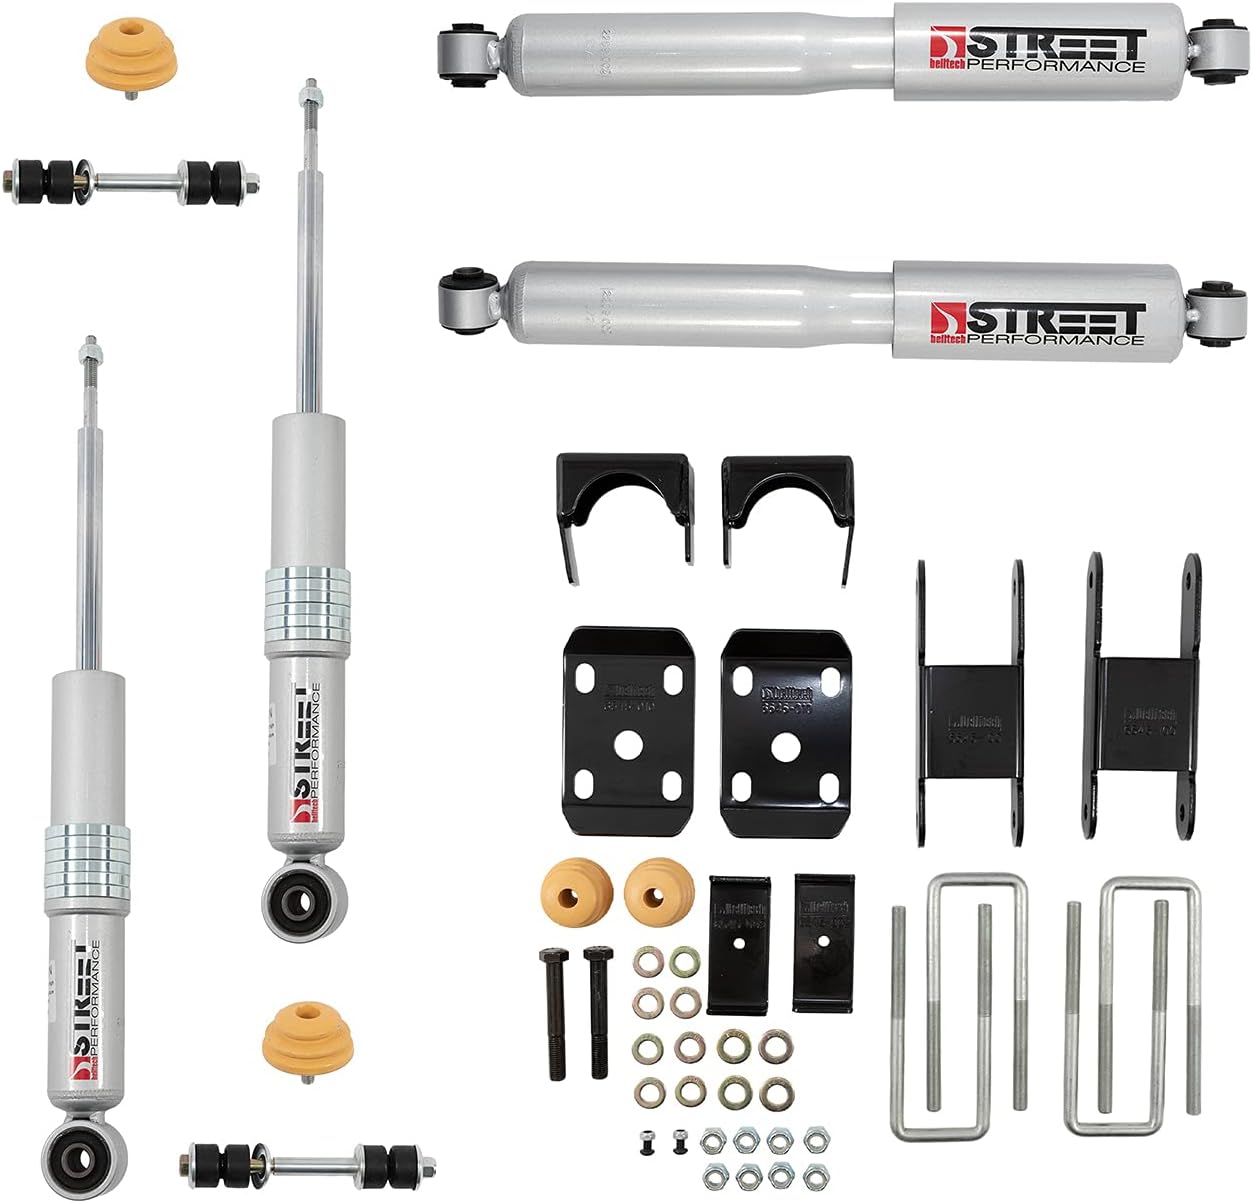 Belltech 999SP Lowering Kit with Street Performance Shock - $440